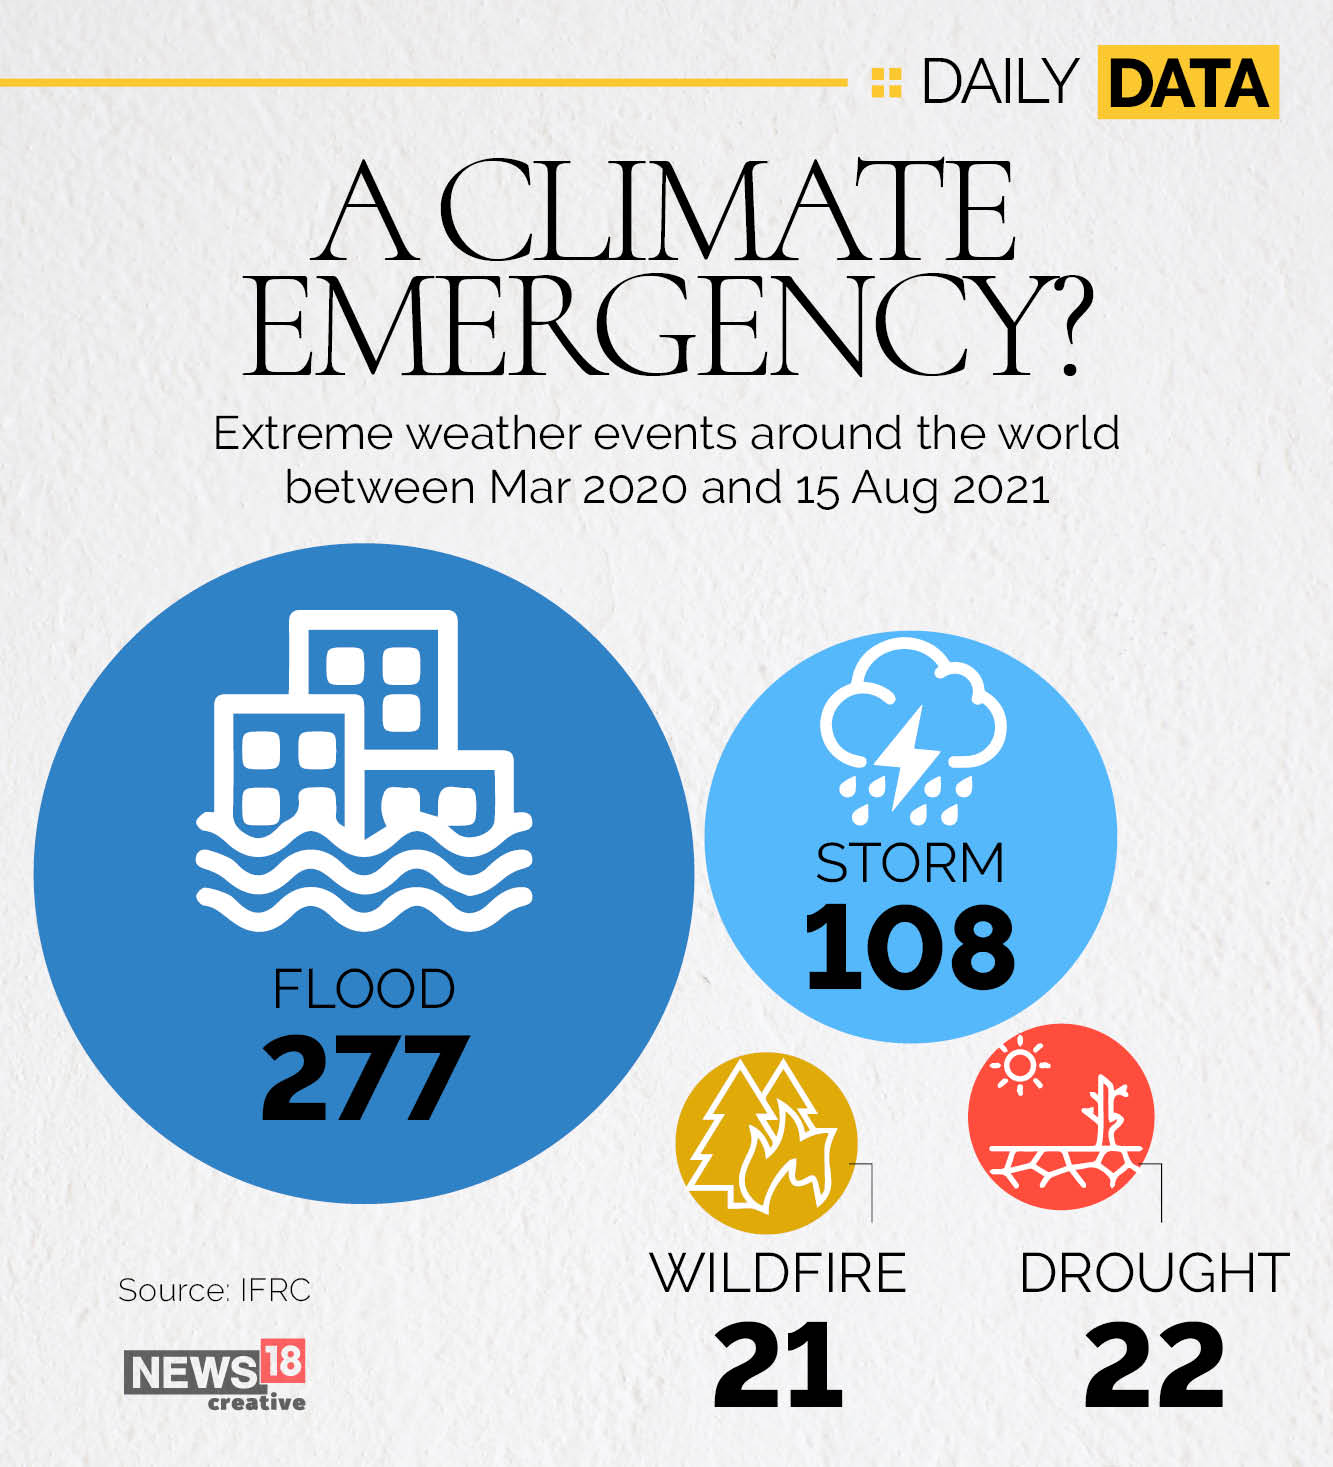 100-plus storms, 277 floods: Are we living the climate emergency?